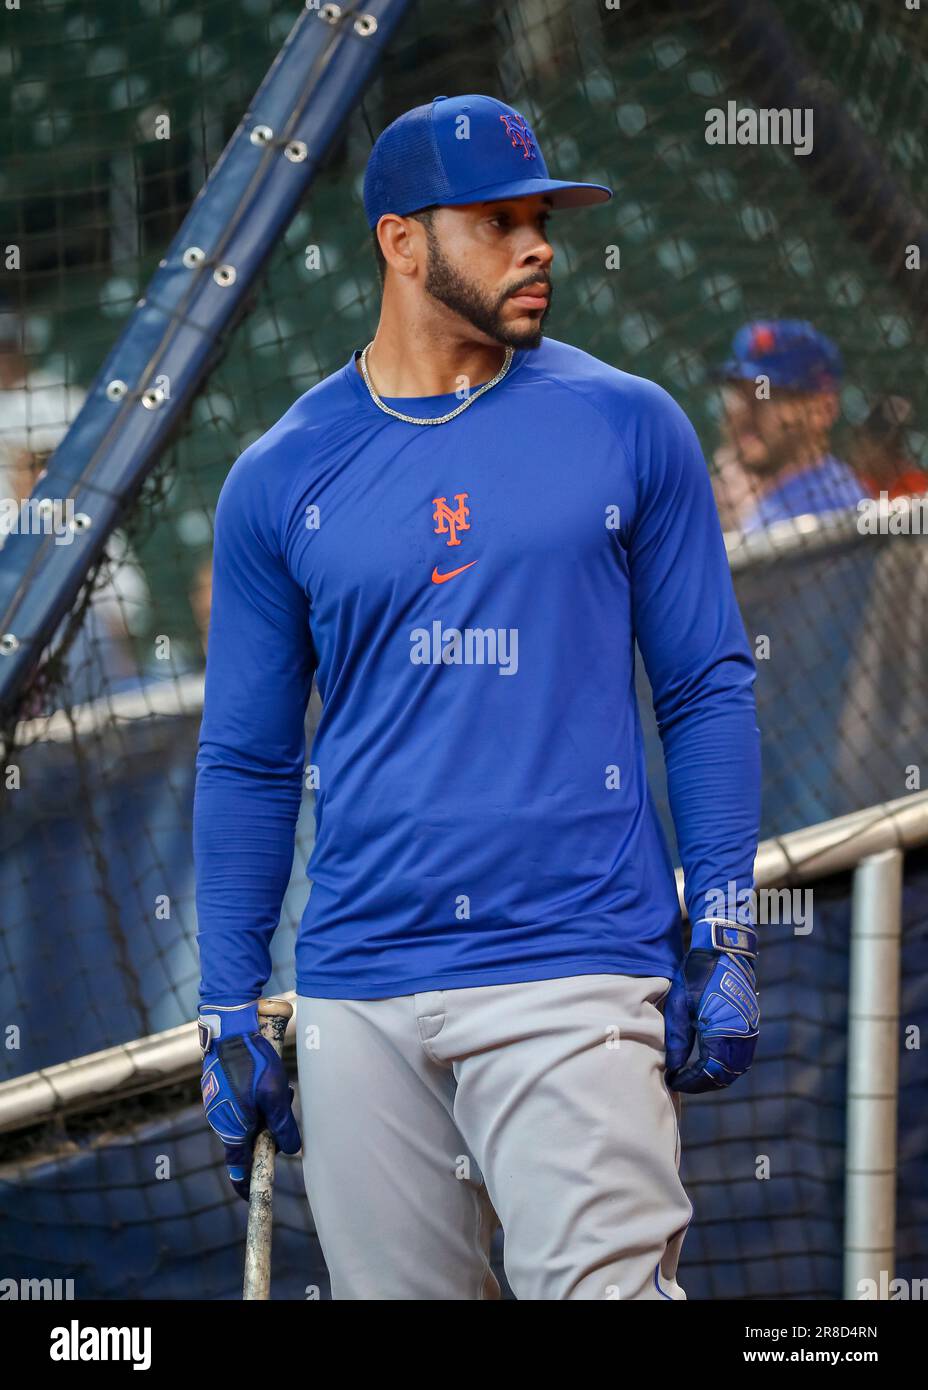 HOUSTON, TX - JUNE 19: New York Mets left fielder Tommy Pham (28) waits for  his turn in the batting cage during the MLB game between the New York Mets  and Houston